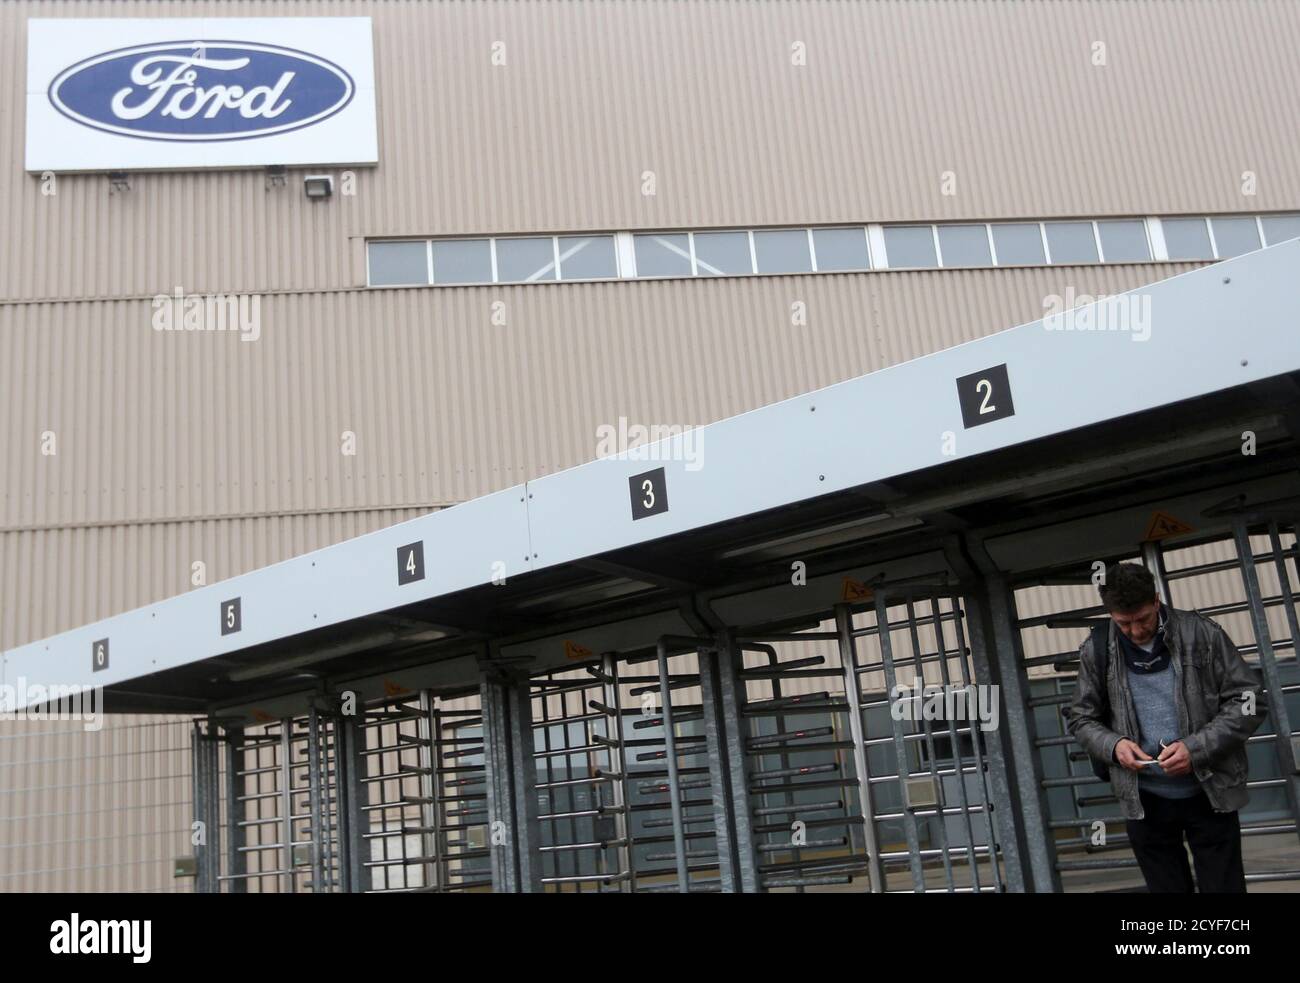 A worker leaves the factory for one of the final shifts at the Ford assembly plant in Genk December 17, 2014. In the heart of western Europe, the Belgian-Dutch-German rust belt has been dealt another blow. Two car plants closed this month as companies sought cheaper labour elsewhere, the final chapter of a manufacturing boom that began when coal mines fuelling Europe's industrialisation shut in the 1960s. Now the region straddling three borders is trying to reinvent itself. A 315 billion euro EU investment plan, announced on Thursday, is the latest potential help. It aims to encourage investor Stock Photo